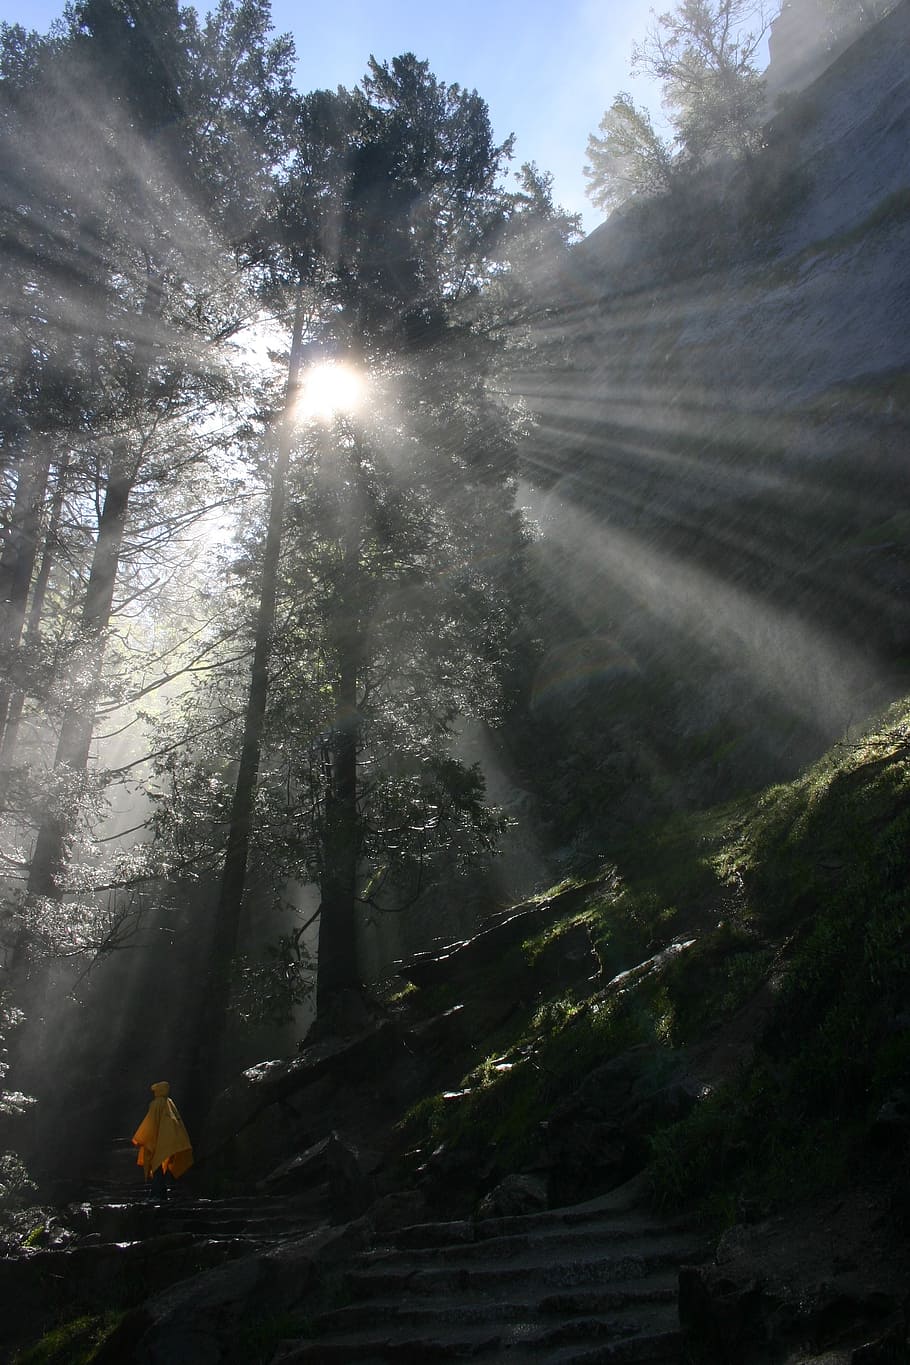 yosemite, nature, hiking, scenic, god's eye, sun rays, tree, plant, forest, beauty in nature